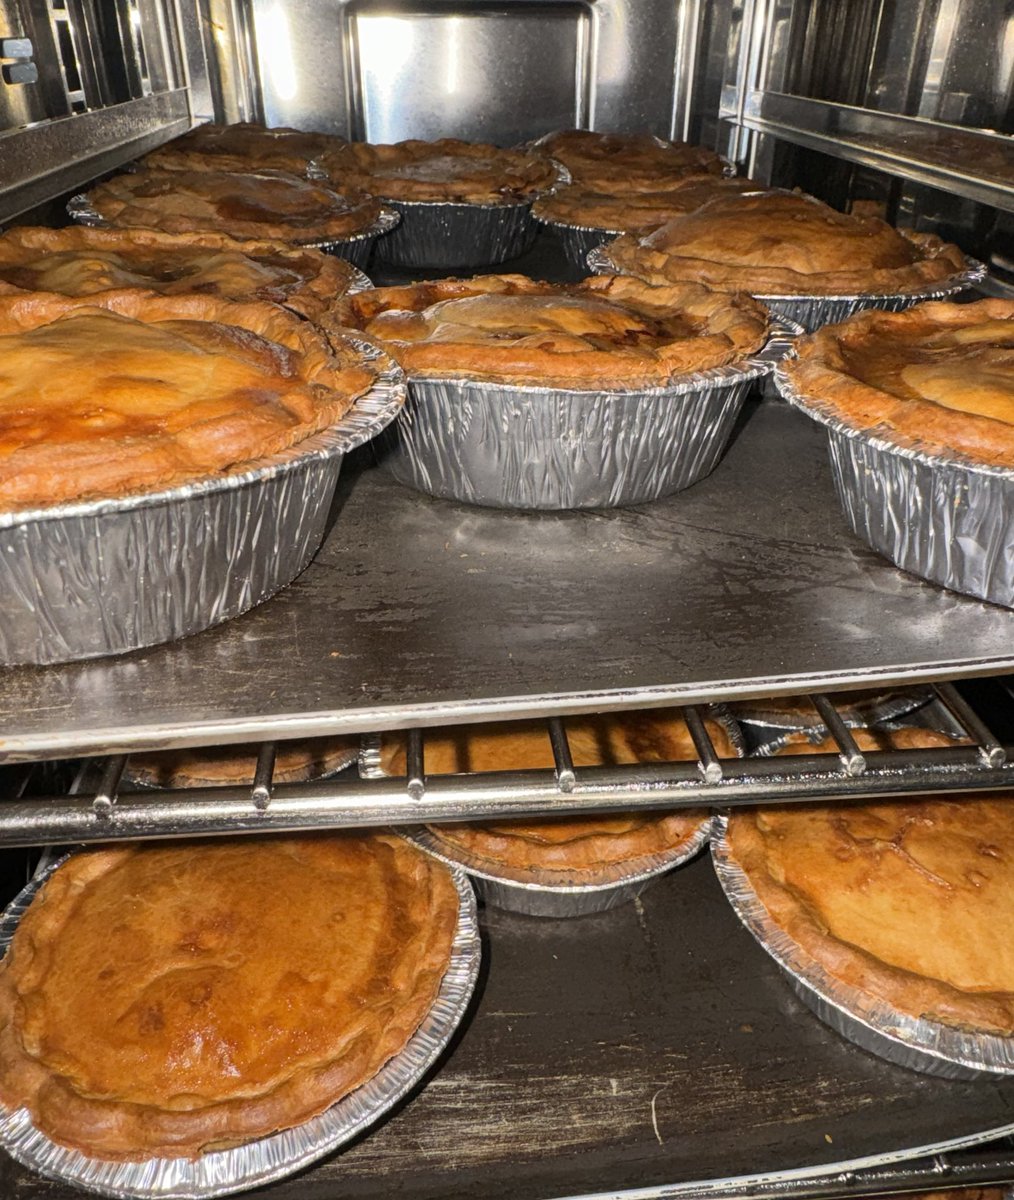 We are open and straight into matchmode for @LFC vs @CPFC! Open until kick-off with our delicious award winning pies🥧 As usual, bring your money for a pie, a donation for @SFoodbanks (if you can) and your voices to get behind the lads🔴 #BuyLocal